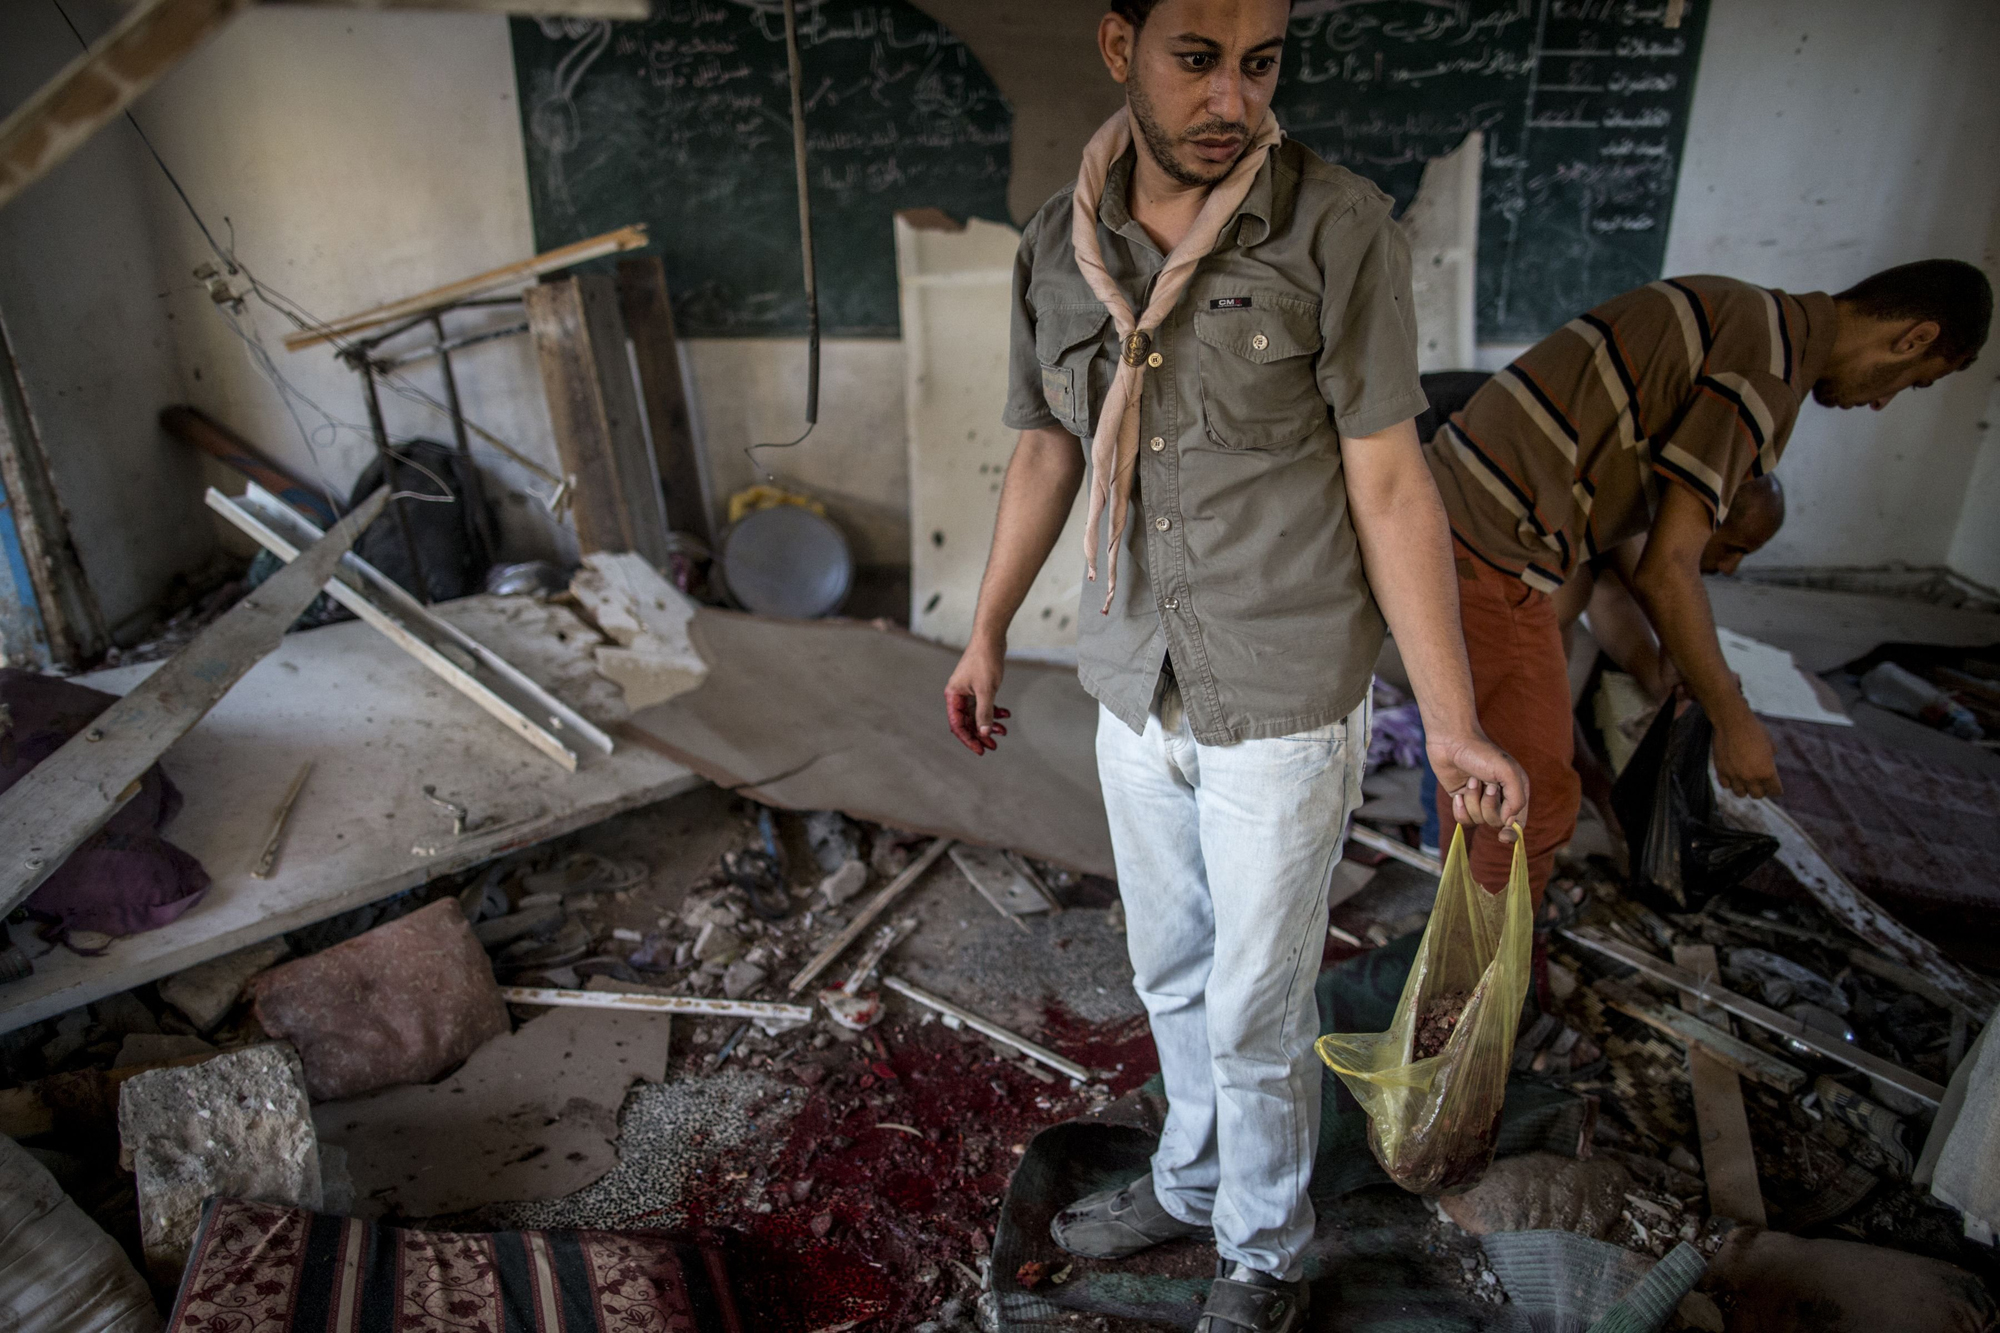 Palestinians collect human remains from a classroom inside a UN school in the Jabalia refugee camp after the area was hit by shelling on July 30, 2014. (Marco Longari—AFP/Getty Images)